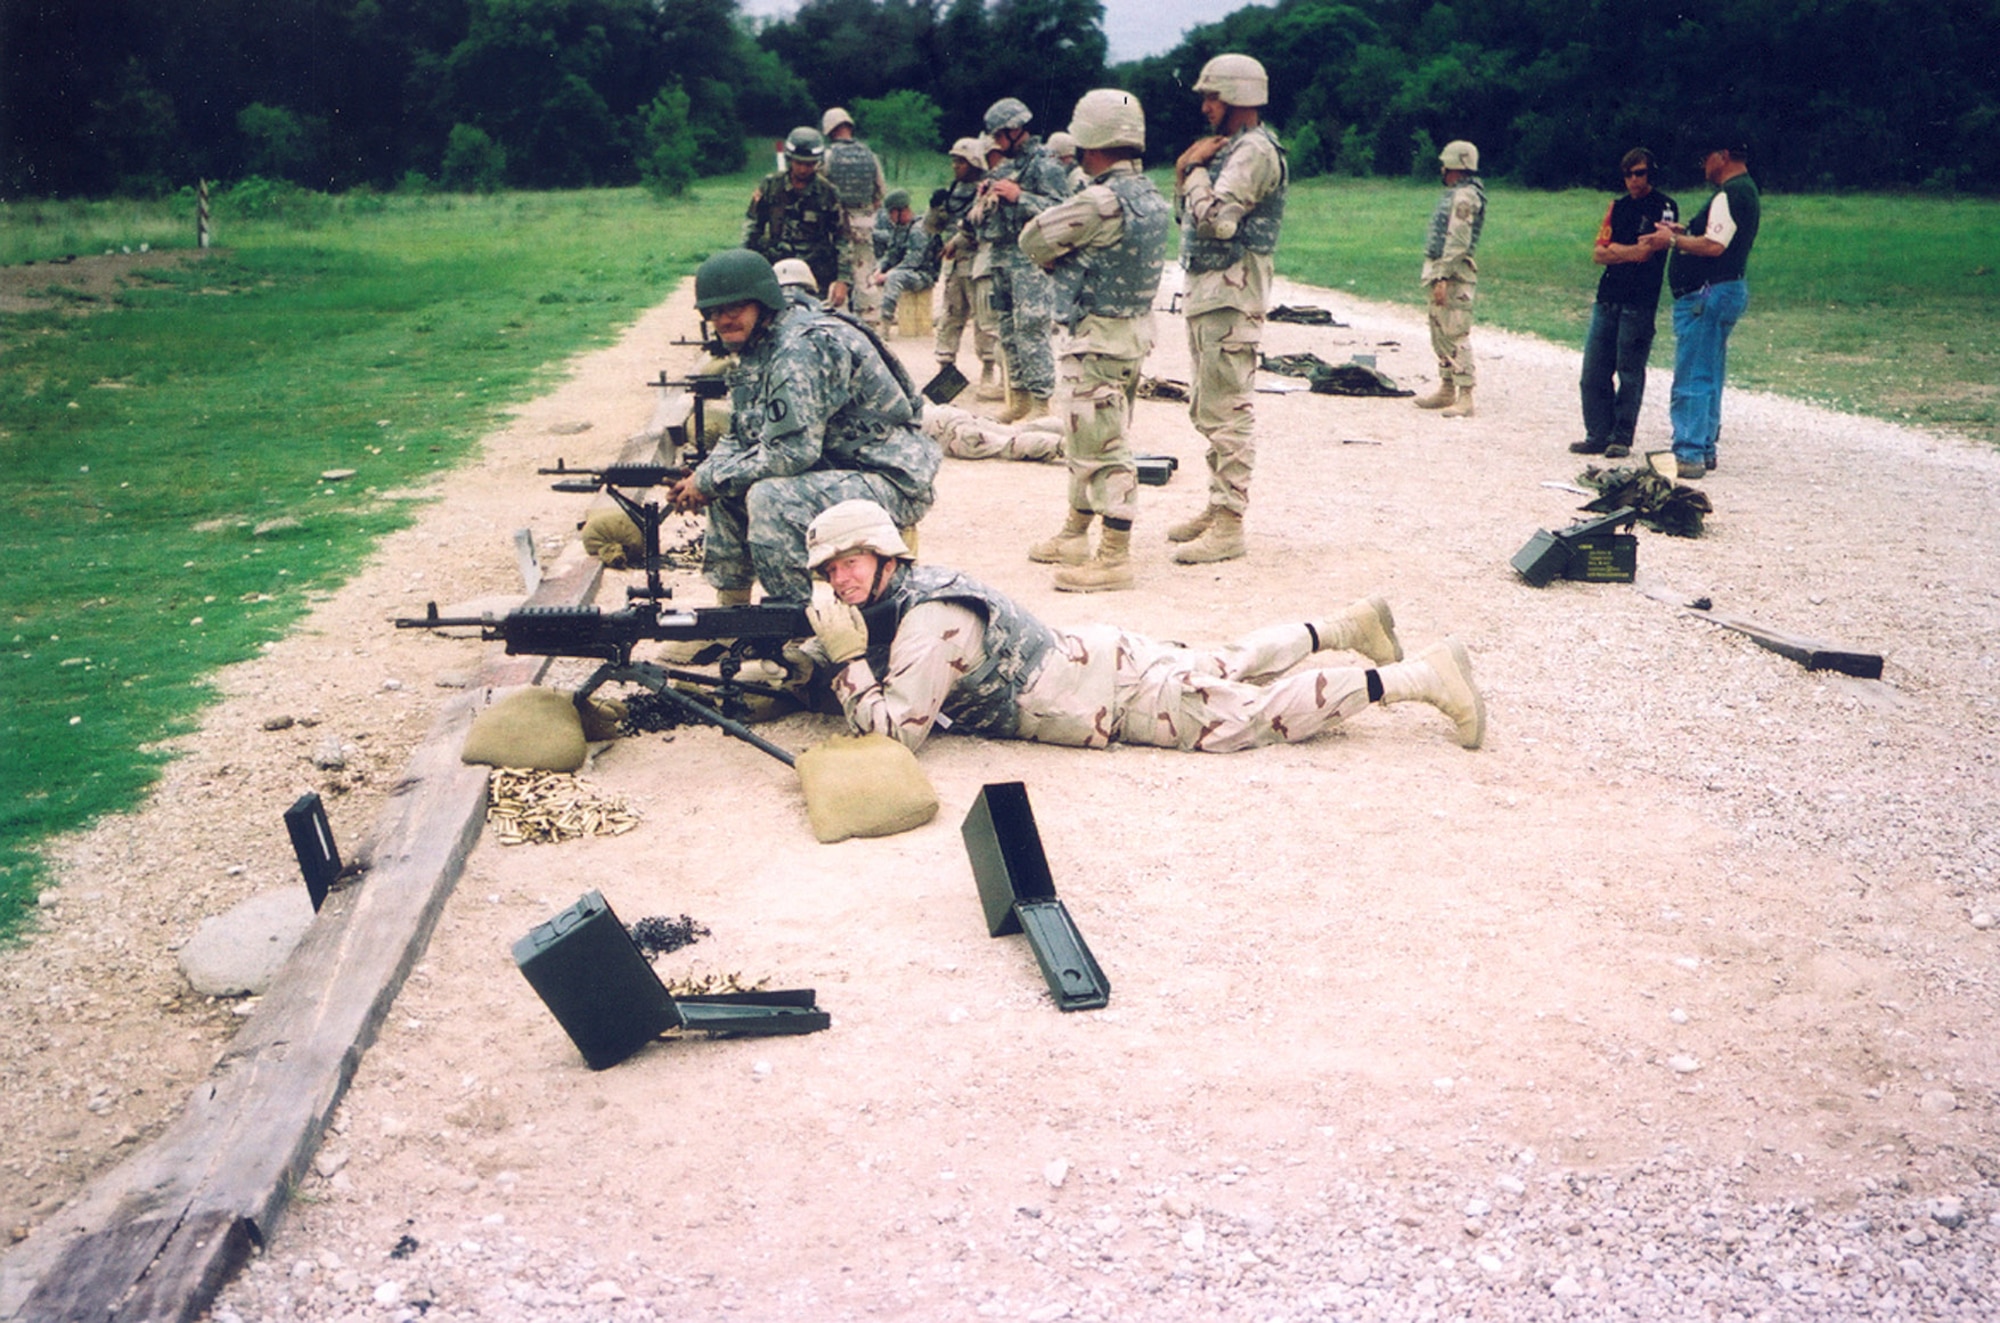 Capt. Scott MacNeil learns Army shooting techniques at Fort Hood, Texas, before deploying to fill an In Lieu of Forces billet in Iraq. Captain MacNeil is assigned to the 52nd Logistics Readiness Squadron from Spangdahlem Air Base, Germany. (Courtesy photo)